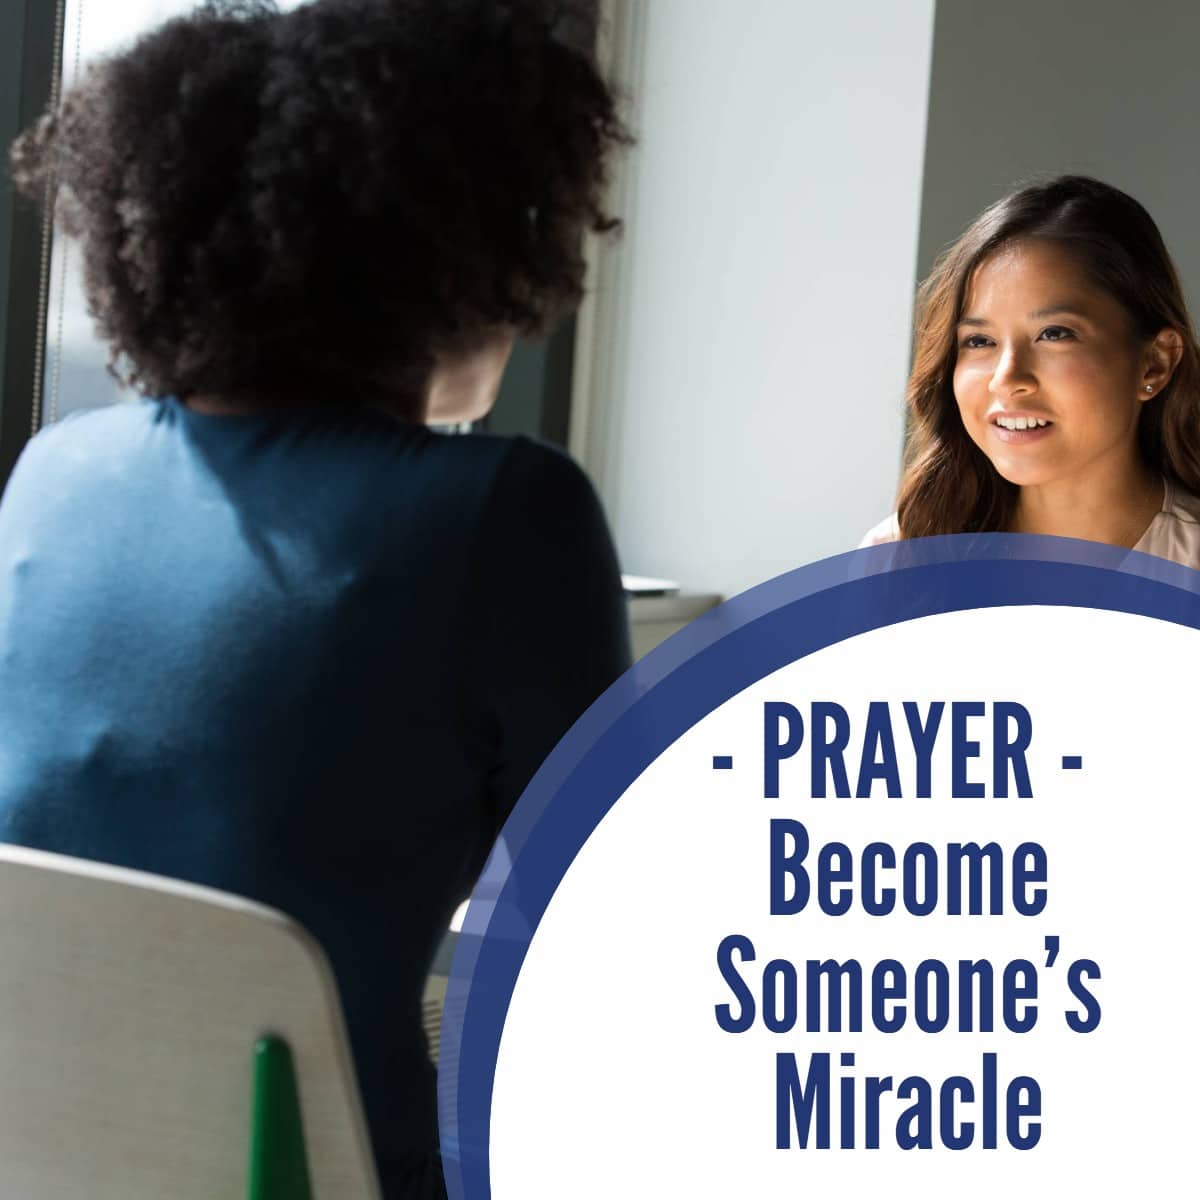 Prayer: Become Someone’s Miracle